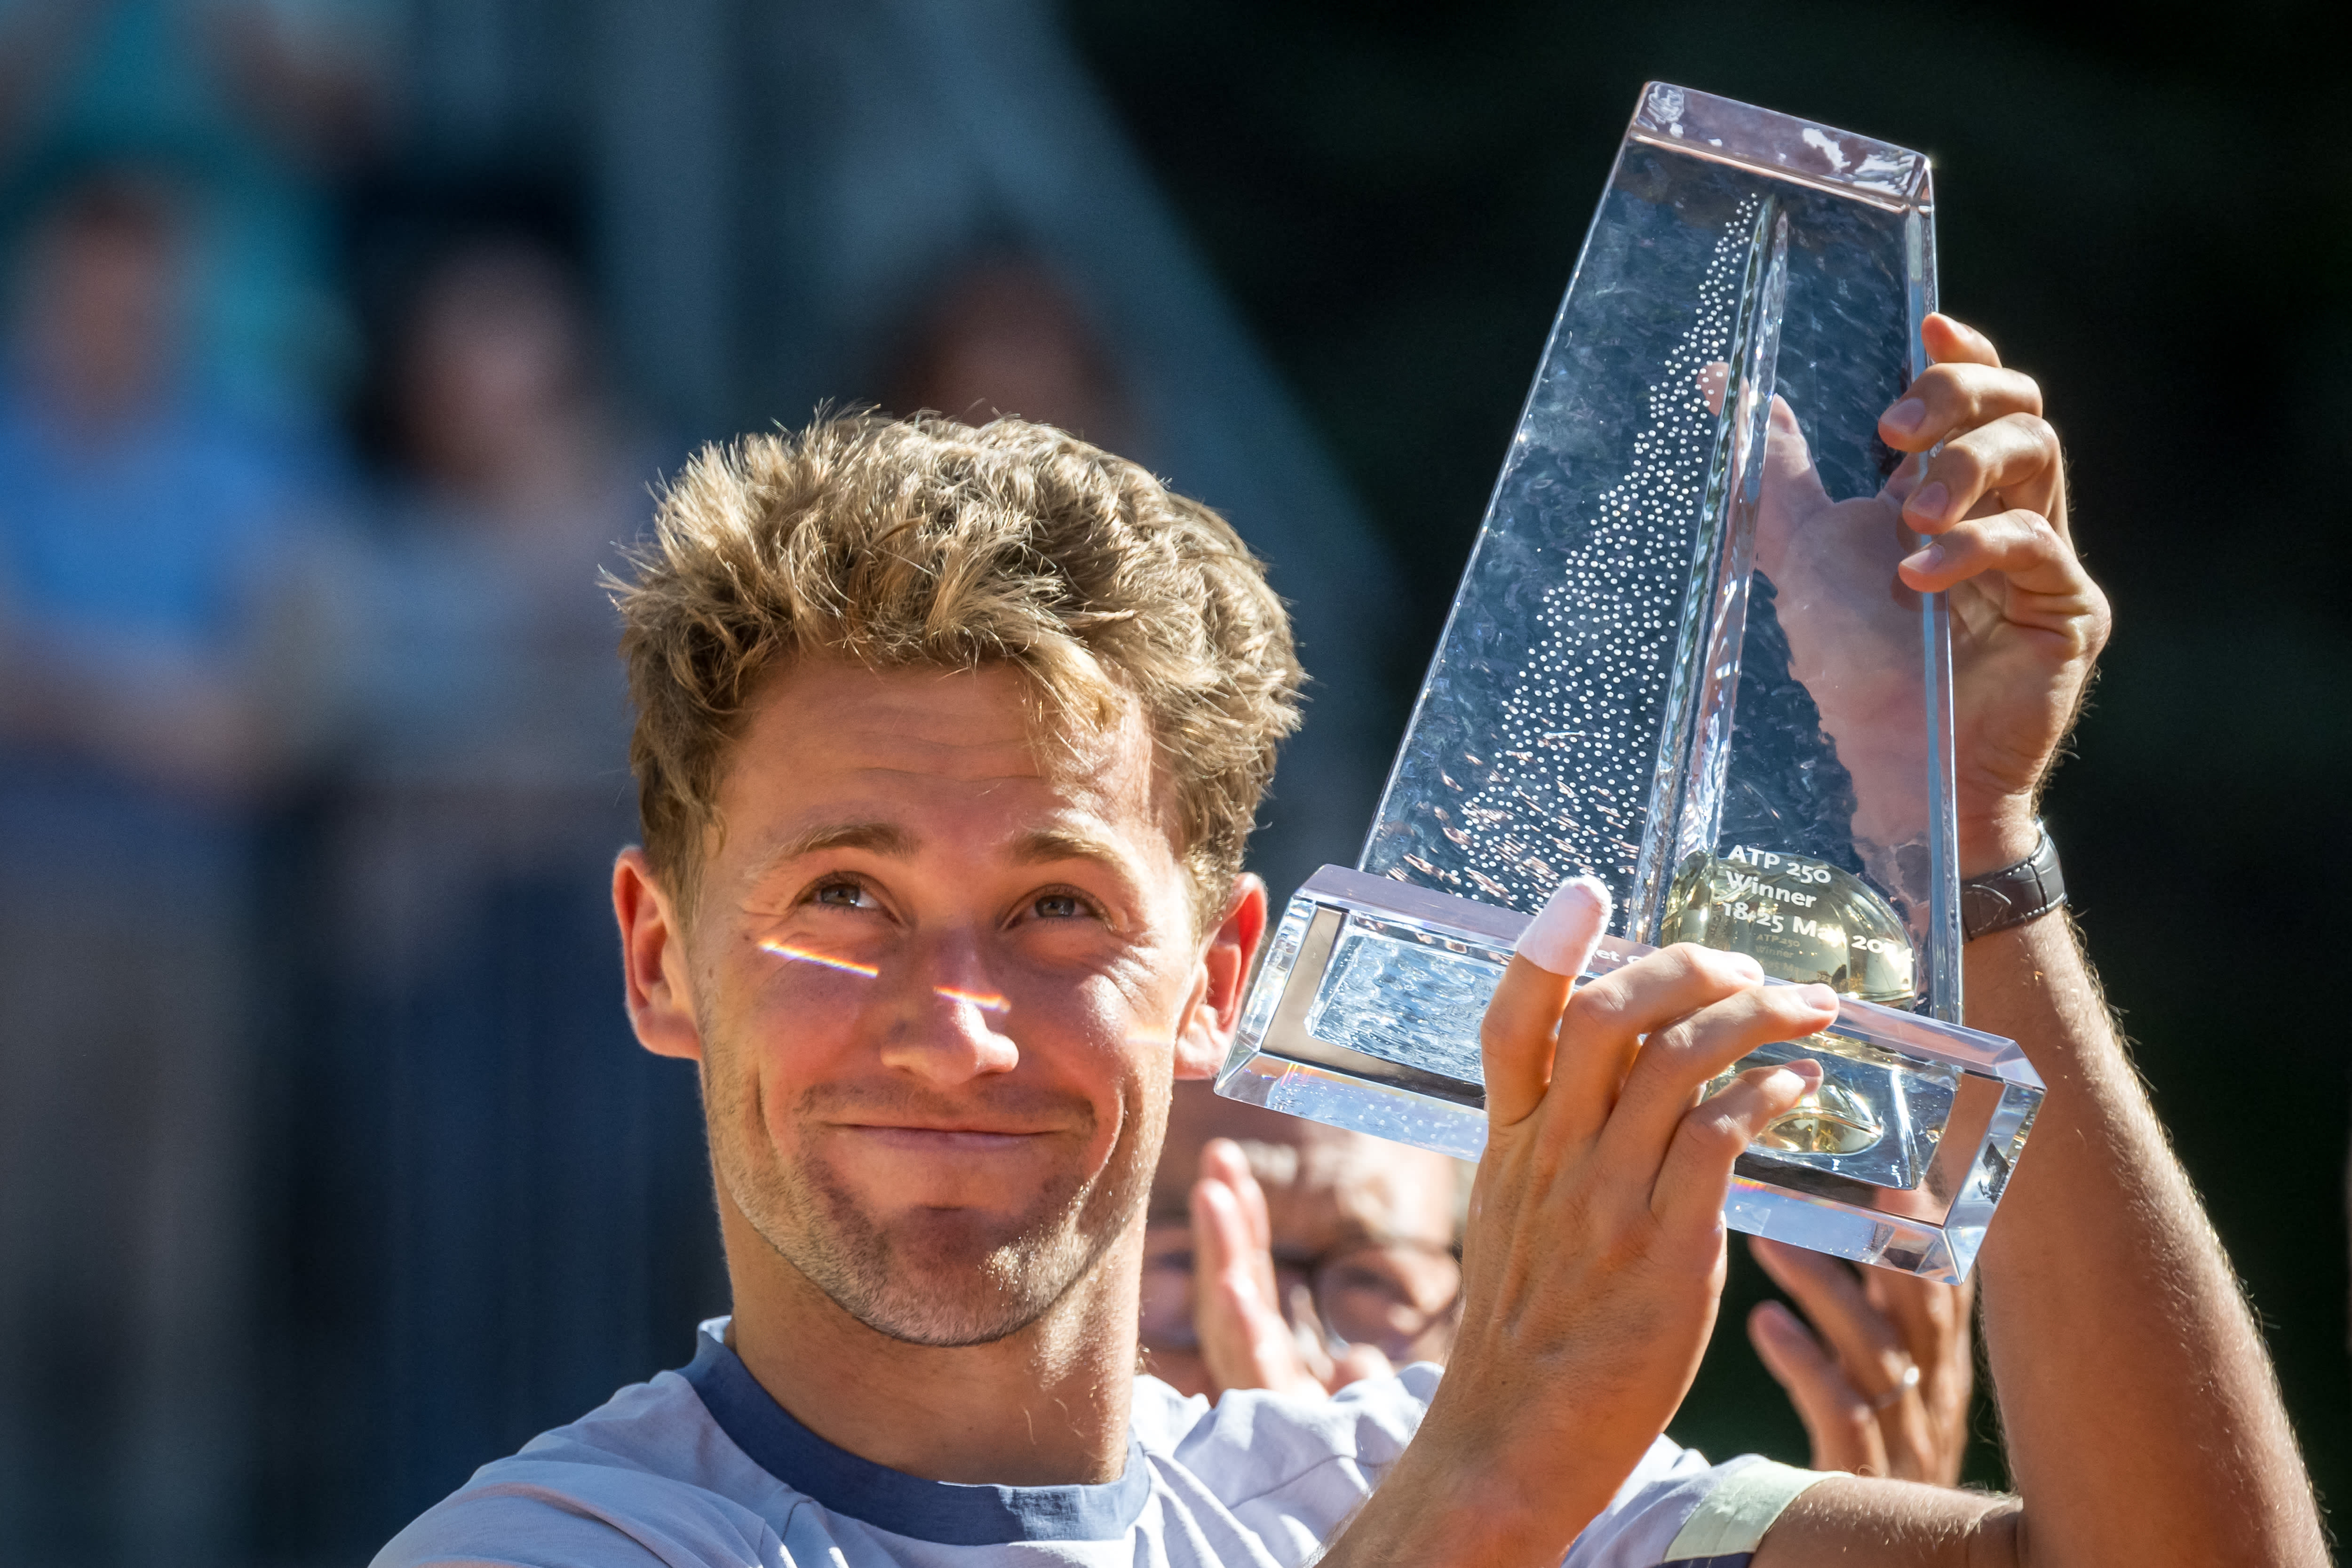 Casper Ruud wins two matches in one day to win his third title in Geneva | Tennis.com